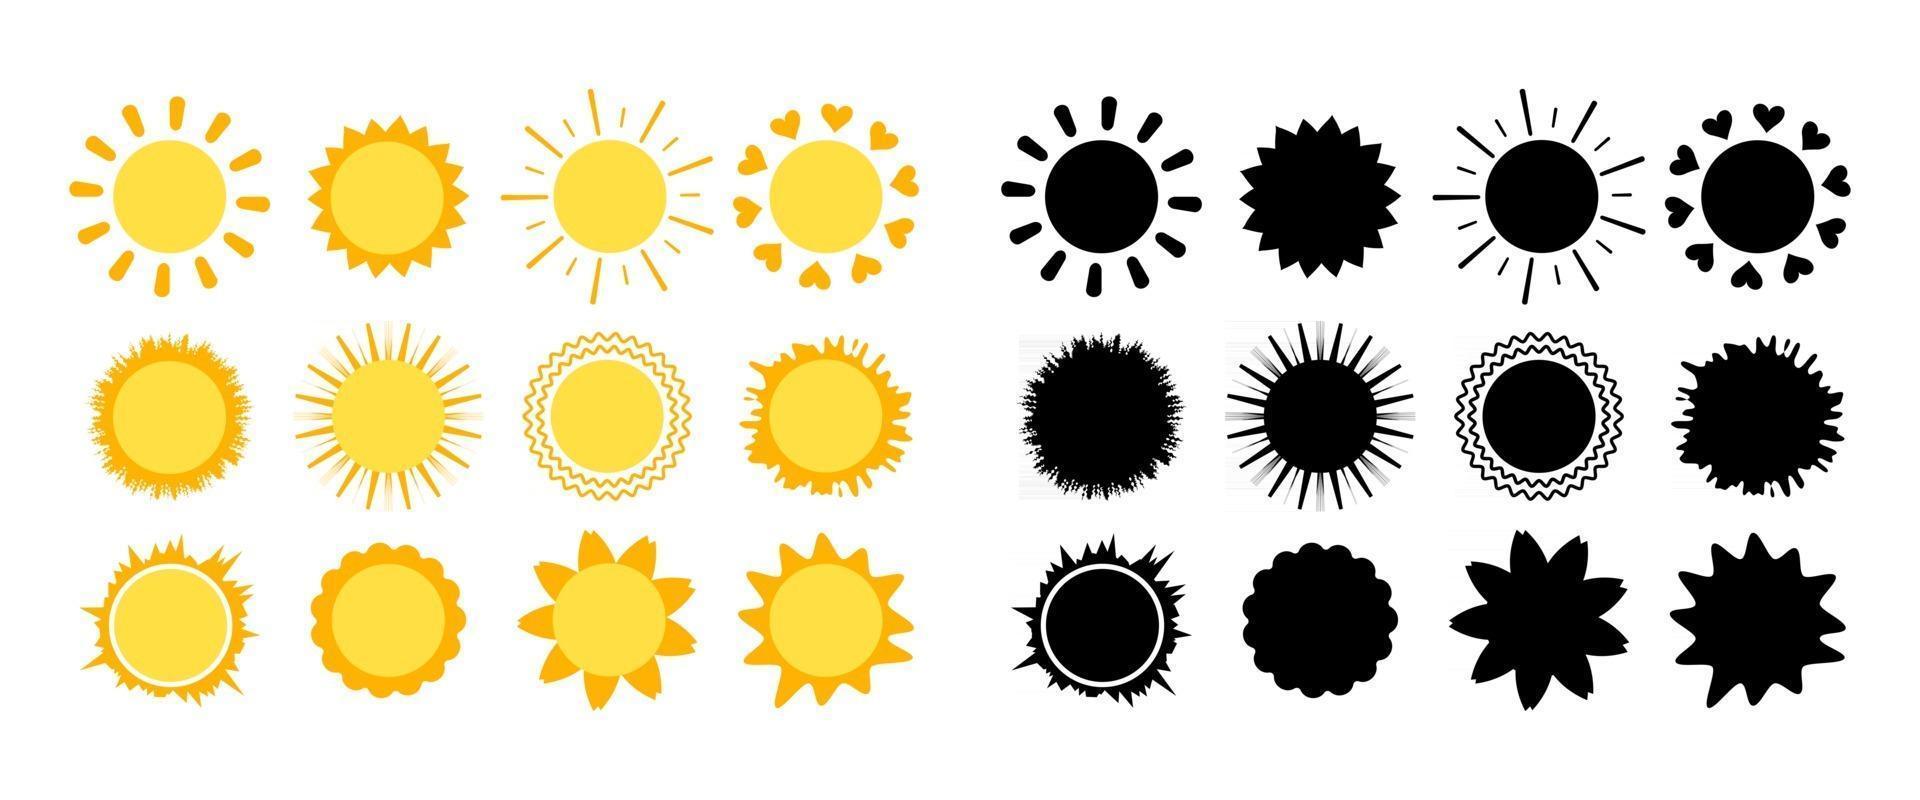 Sun icons set with rays of different shapes and black silhouette isolated on white background. Yellow symbol of spring, summer and weather vector